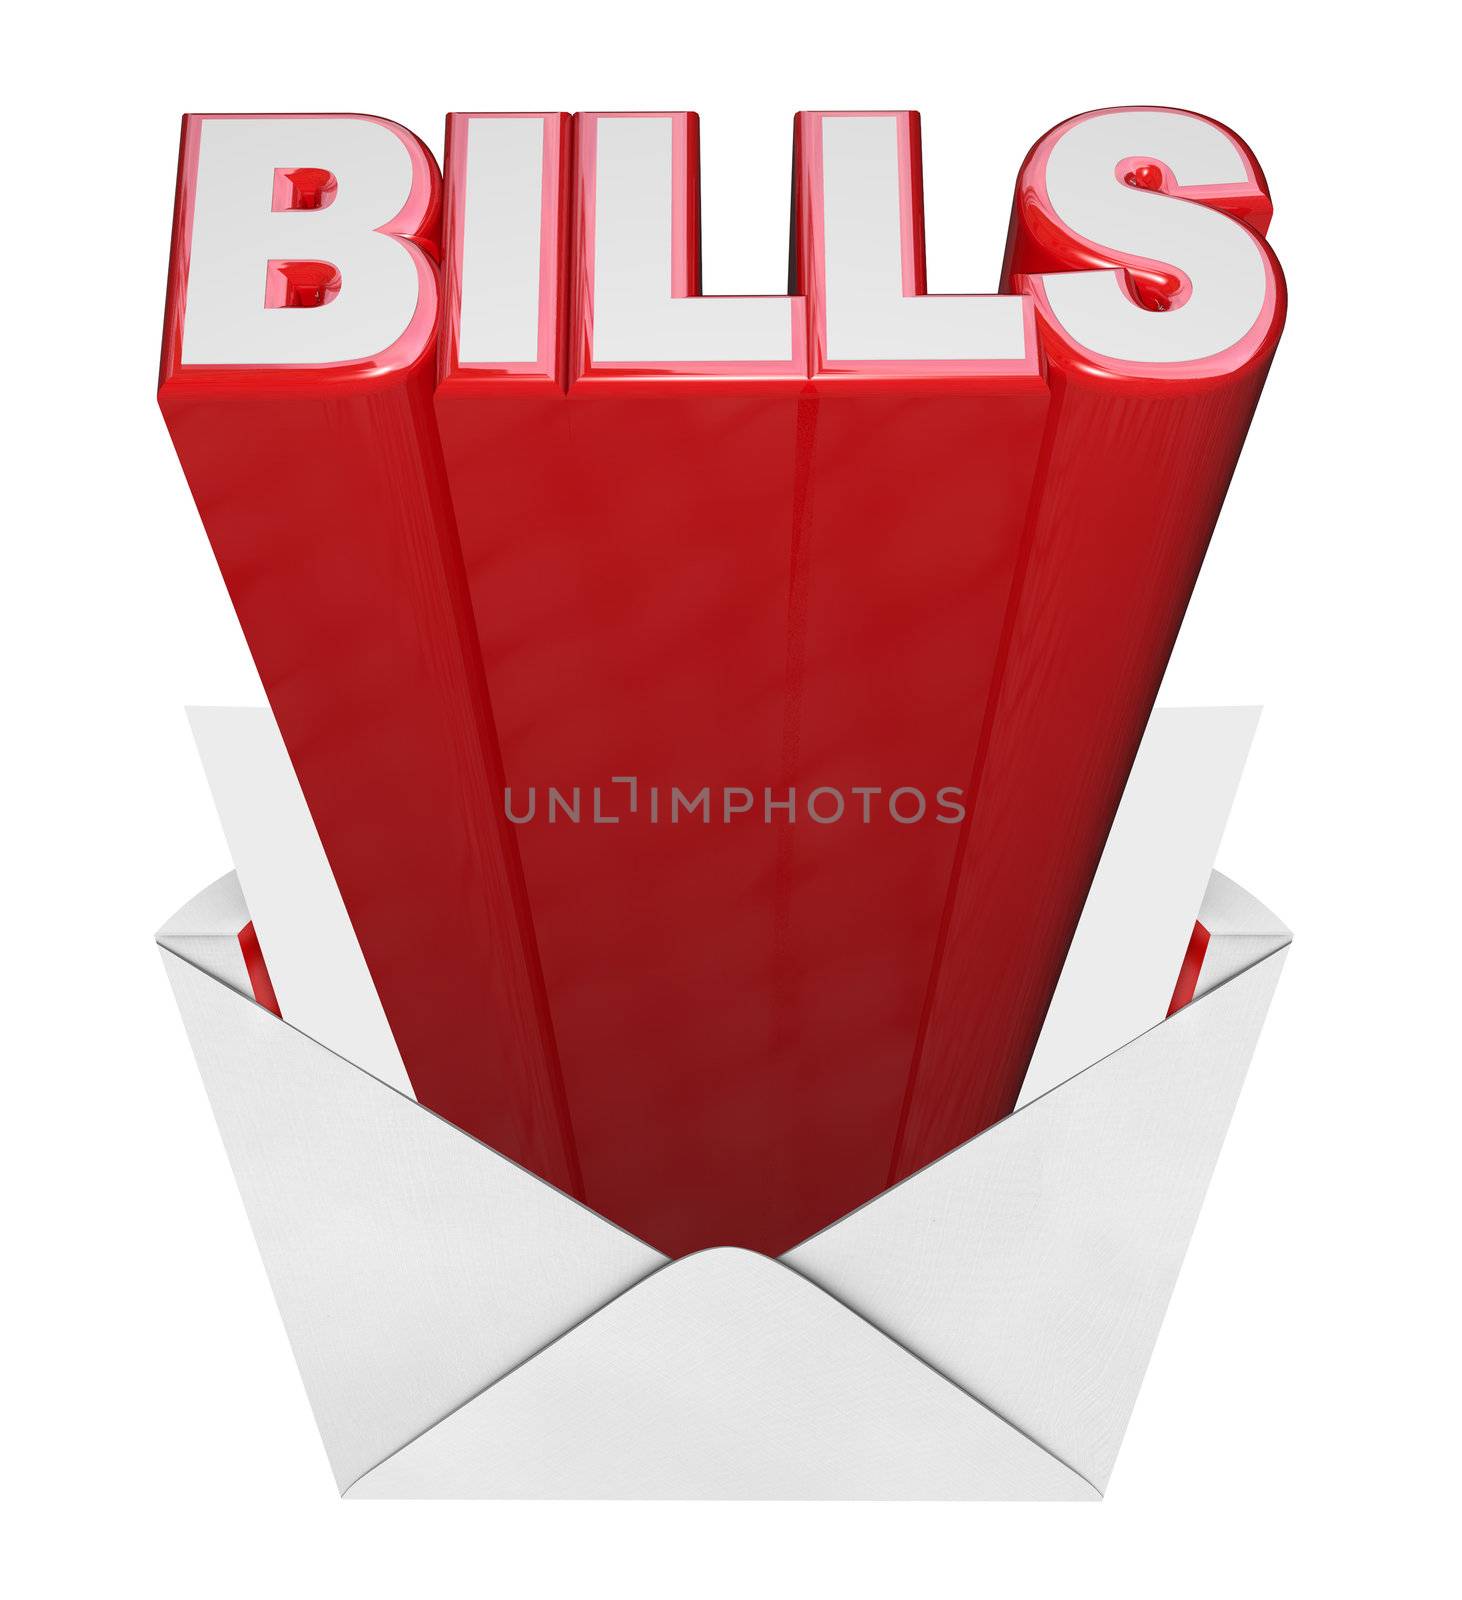 Bills Word in Envelope - Time to Pay Invoices and Expenses by iQoncept